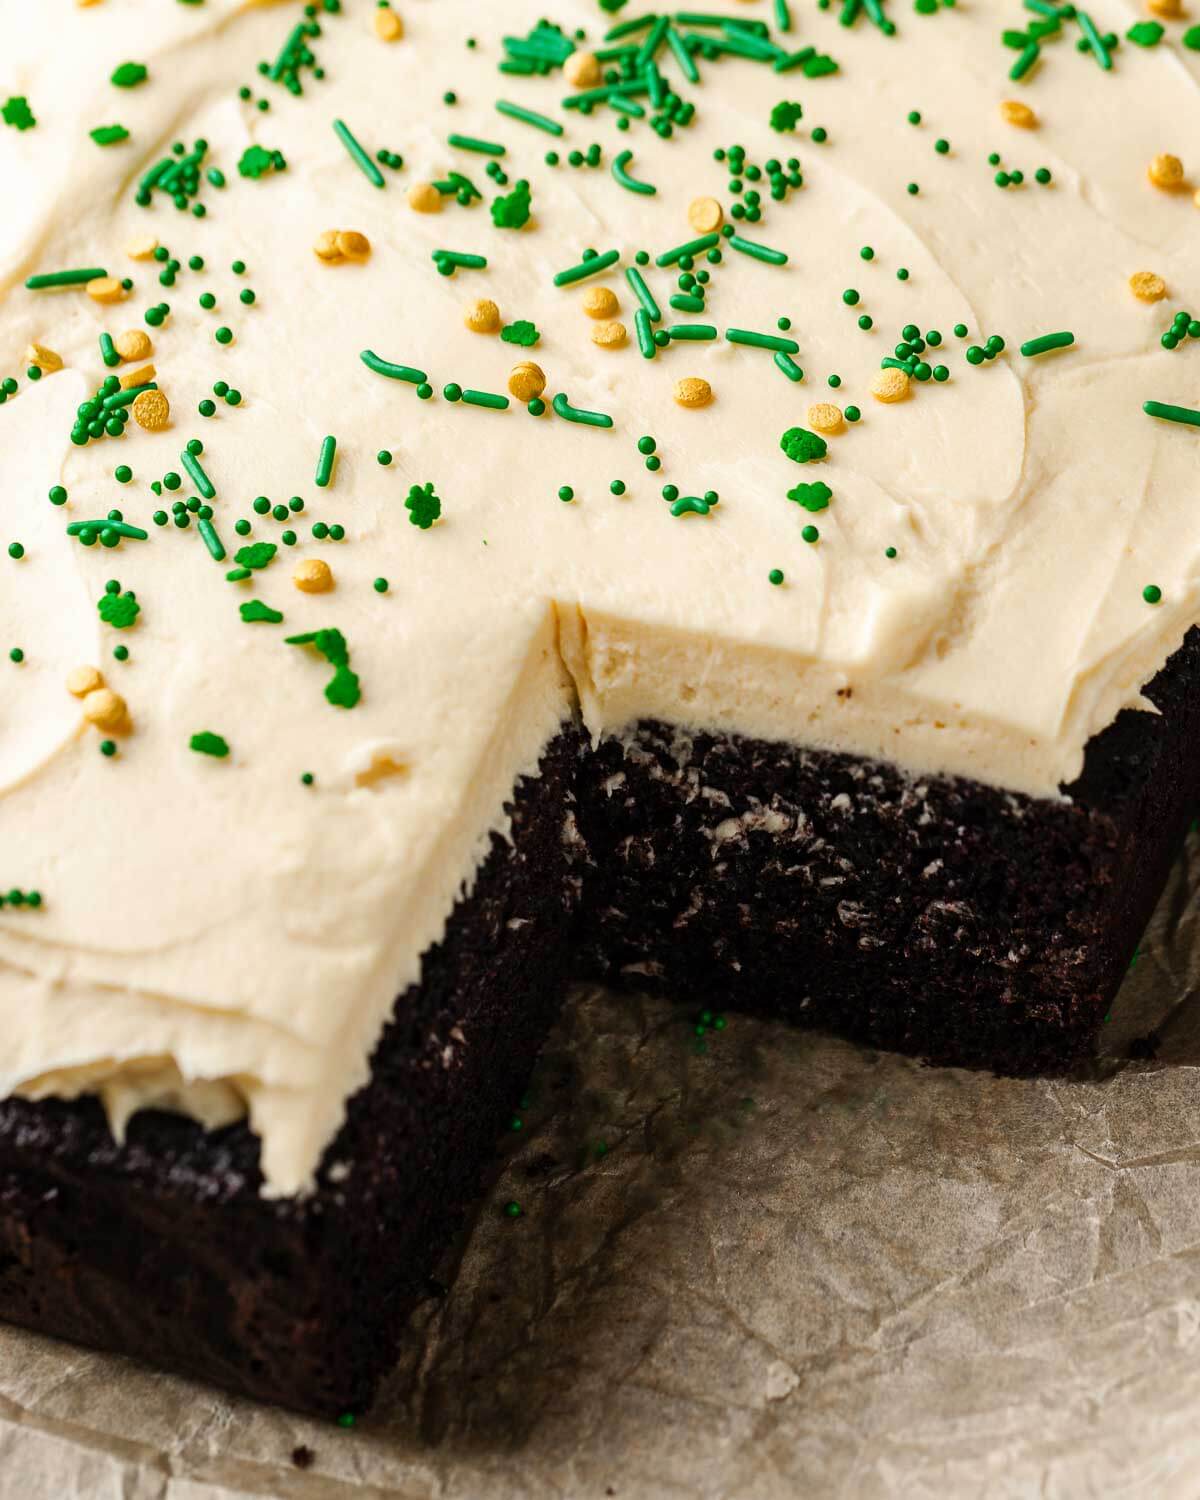 Chocolate Guinness cake with Baileys frosting and Irish sprinkles.